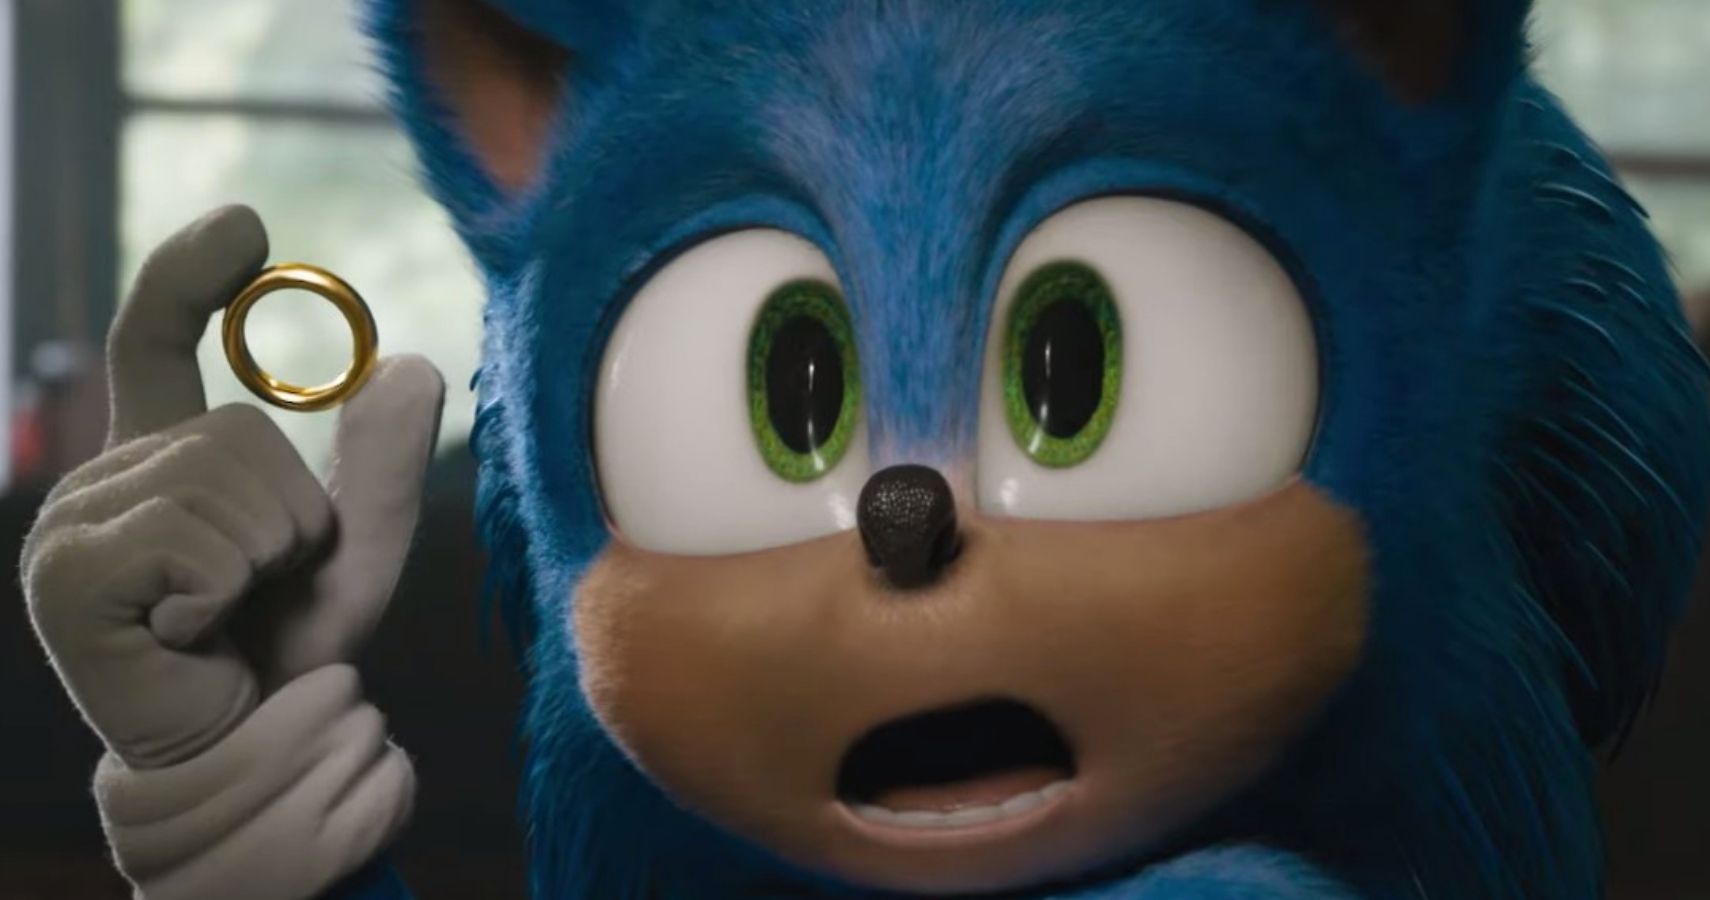 Sonic The Hedgehog 10 Easter Eggs You May Have Missed